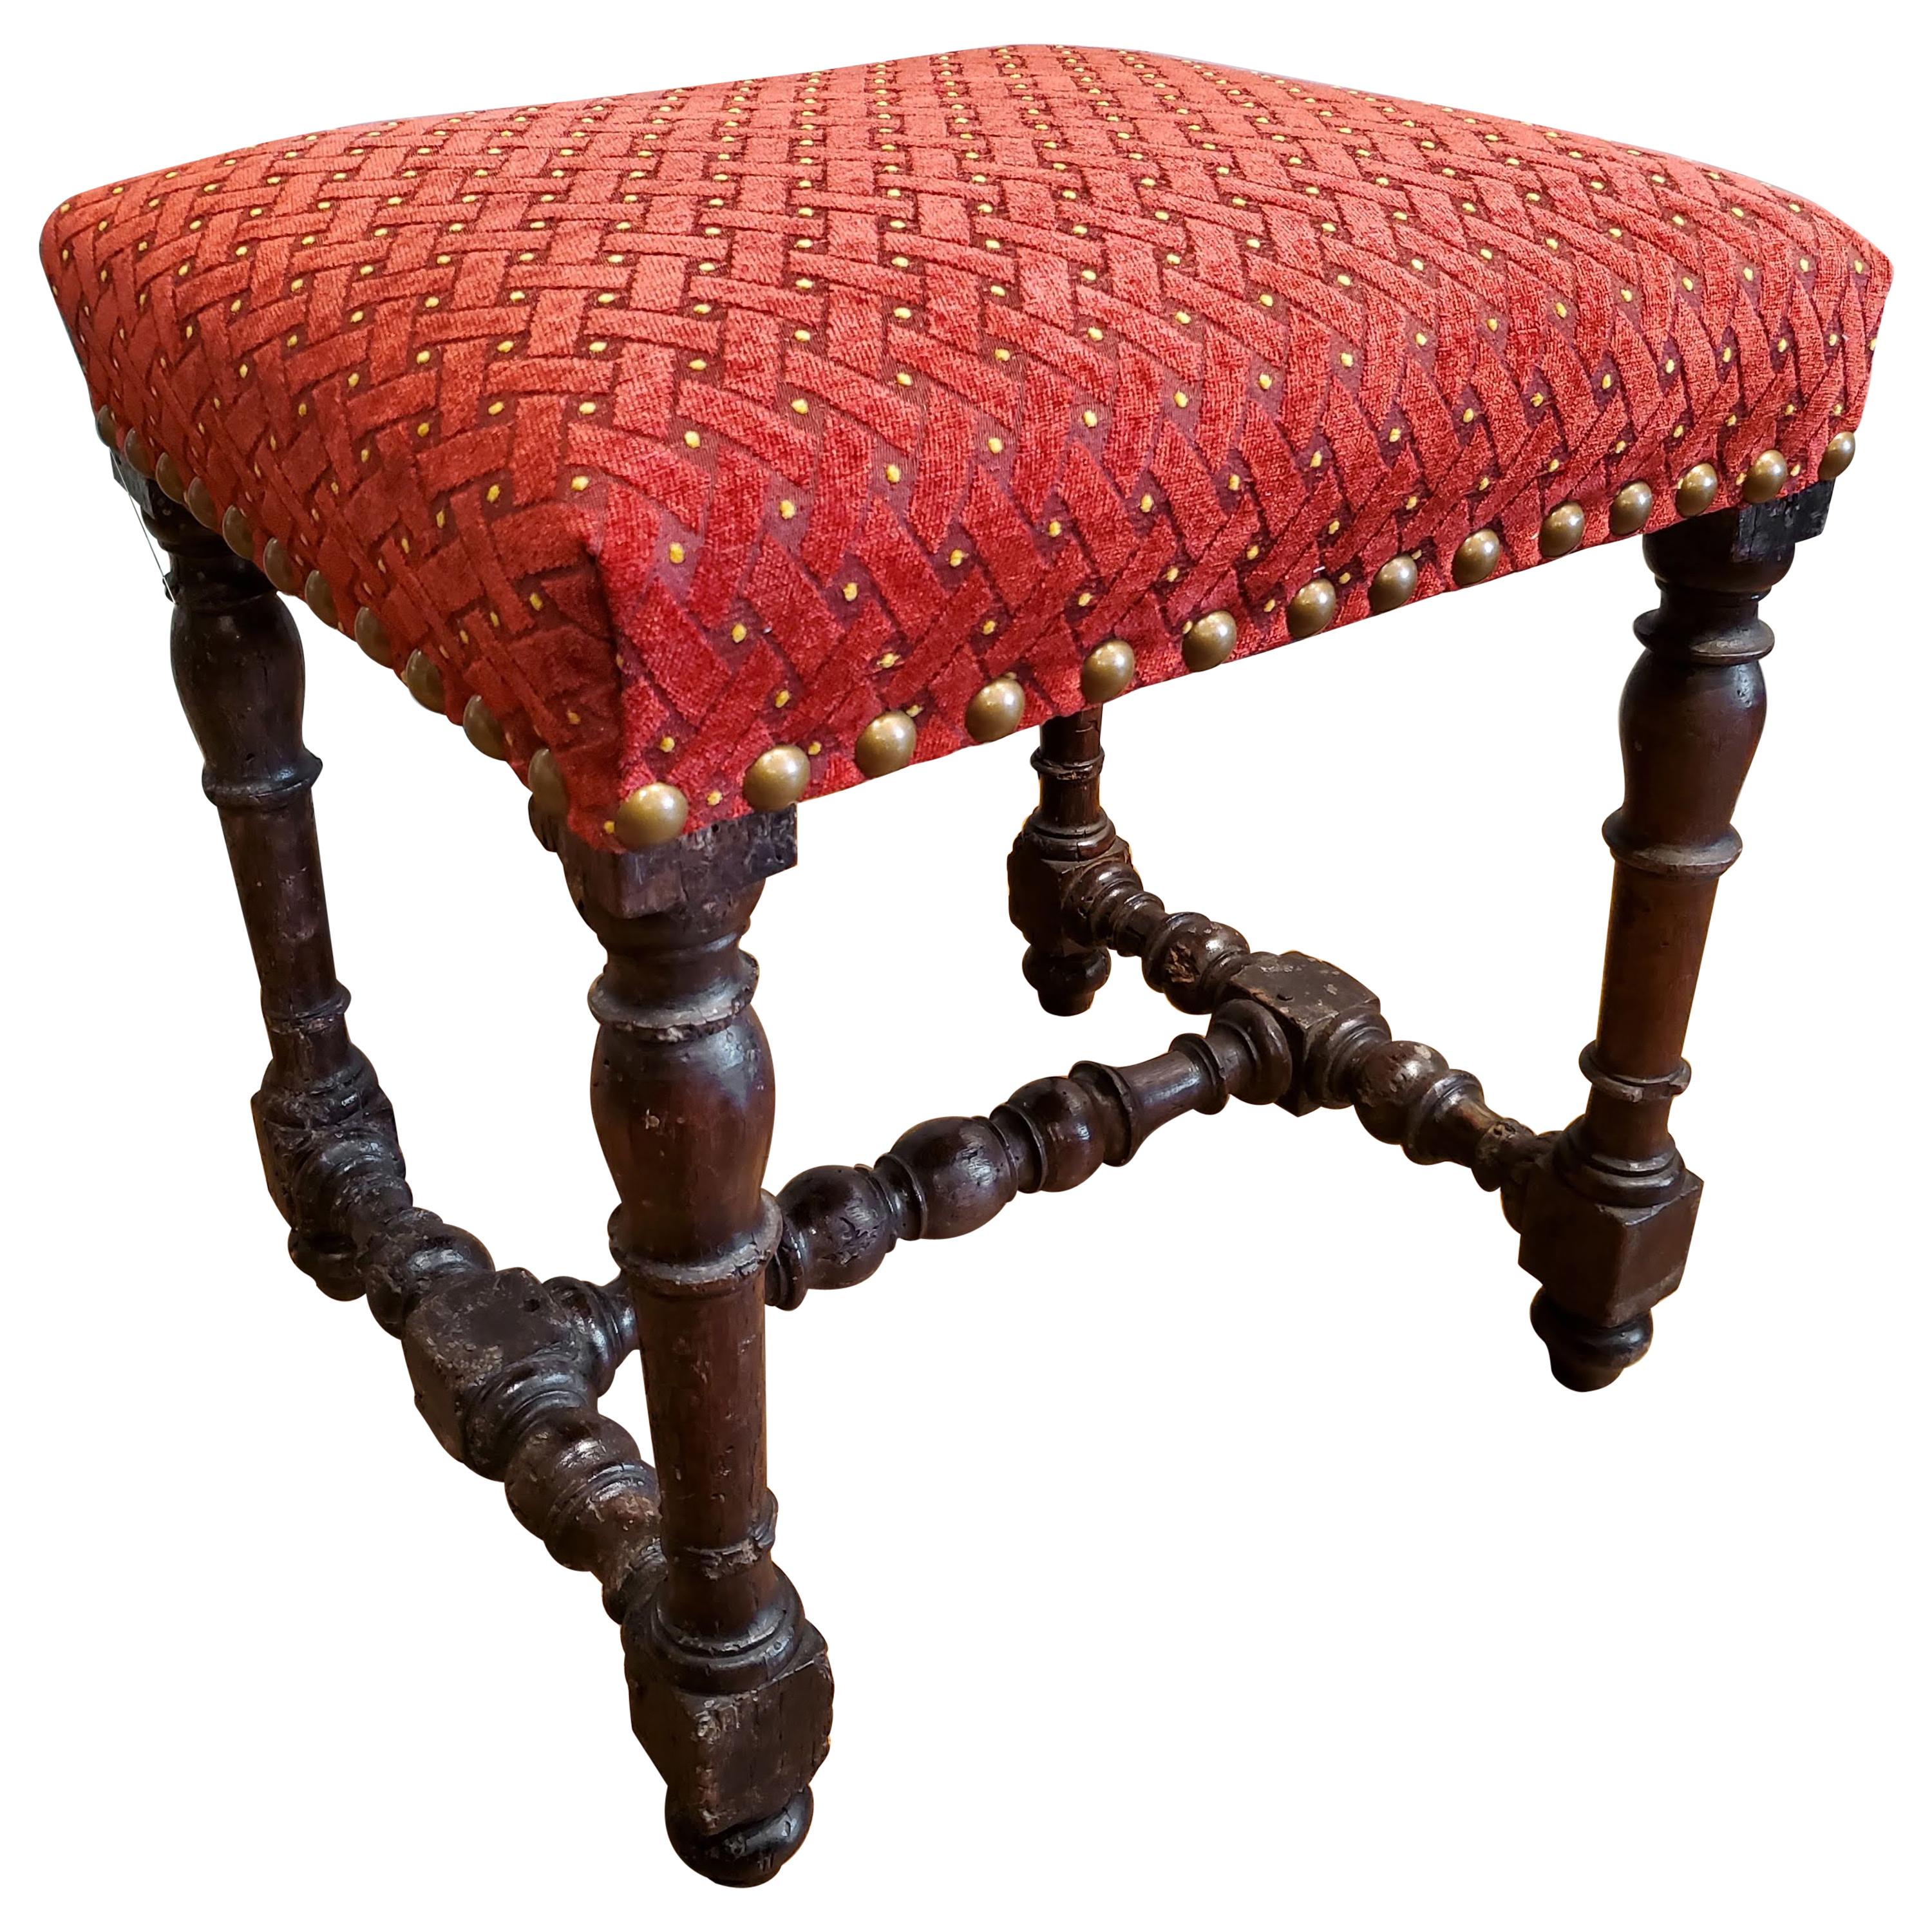 Small 17th Century Stool Upholstered in Red Chenille Fabric and Brass Nailheads